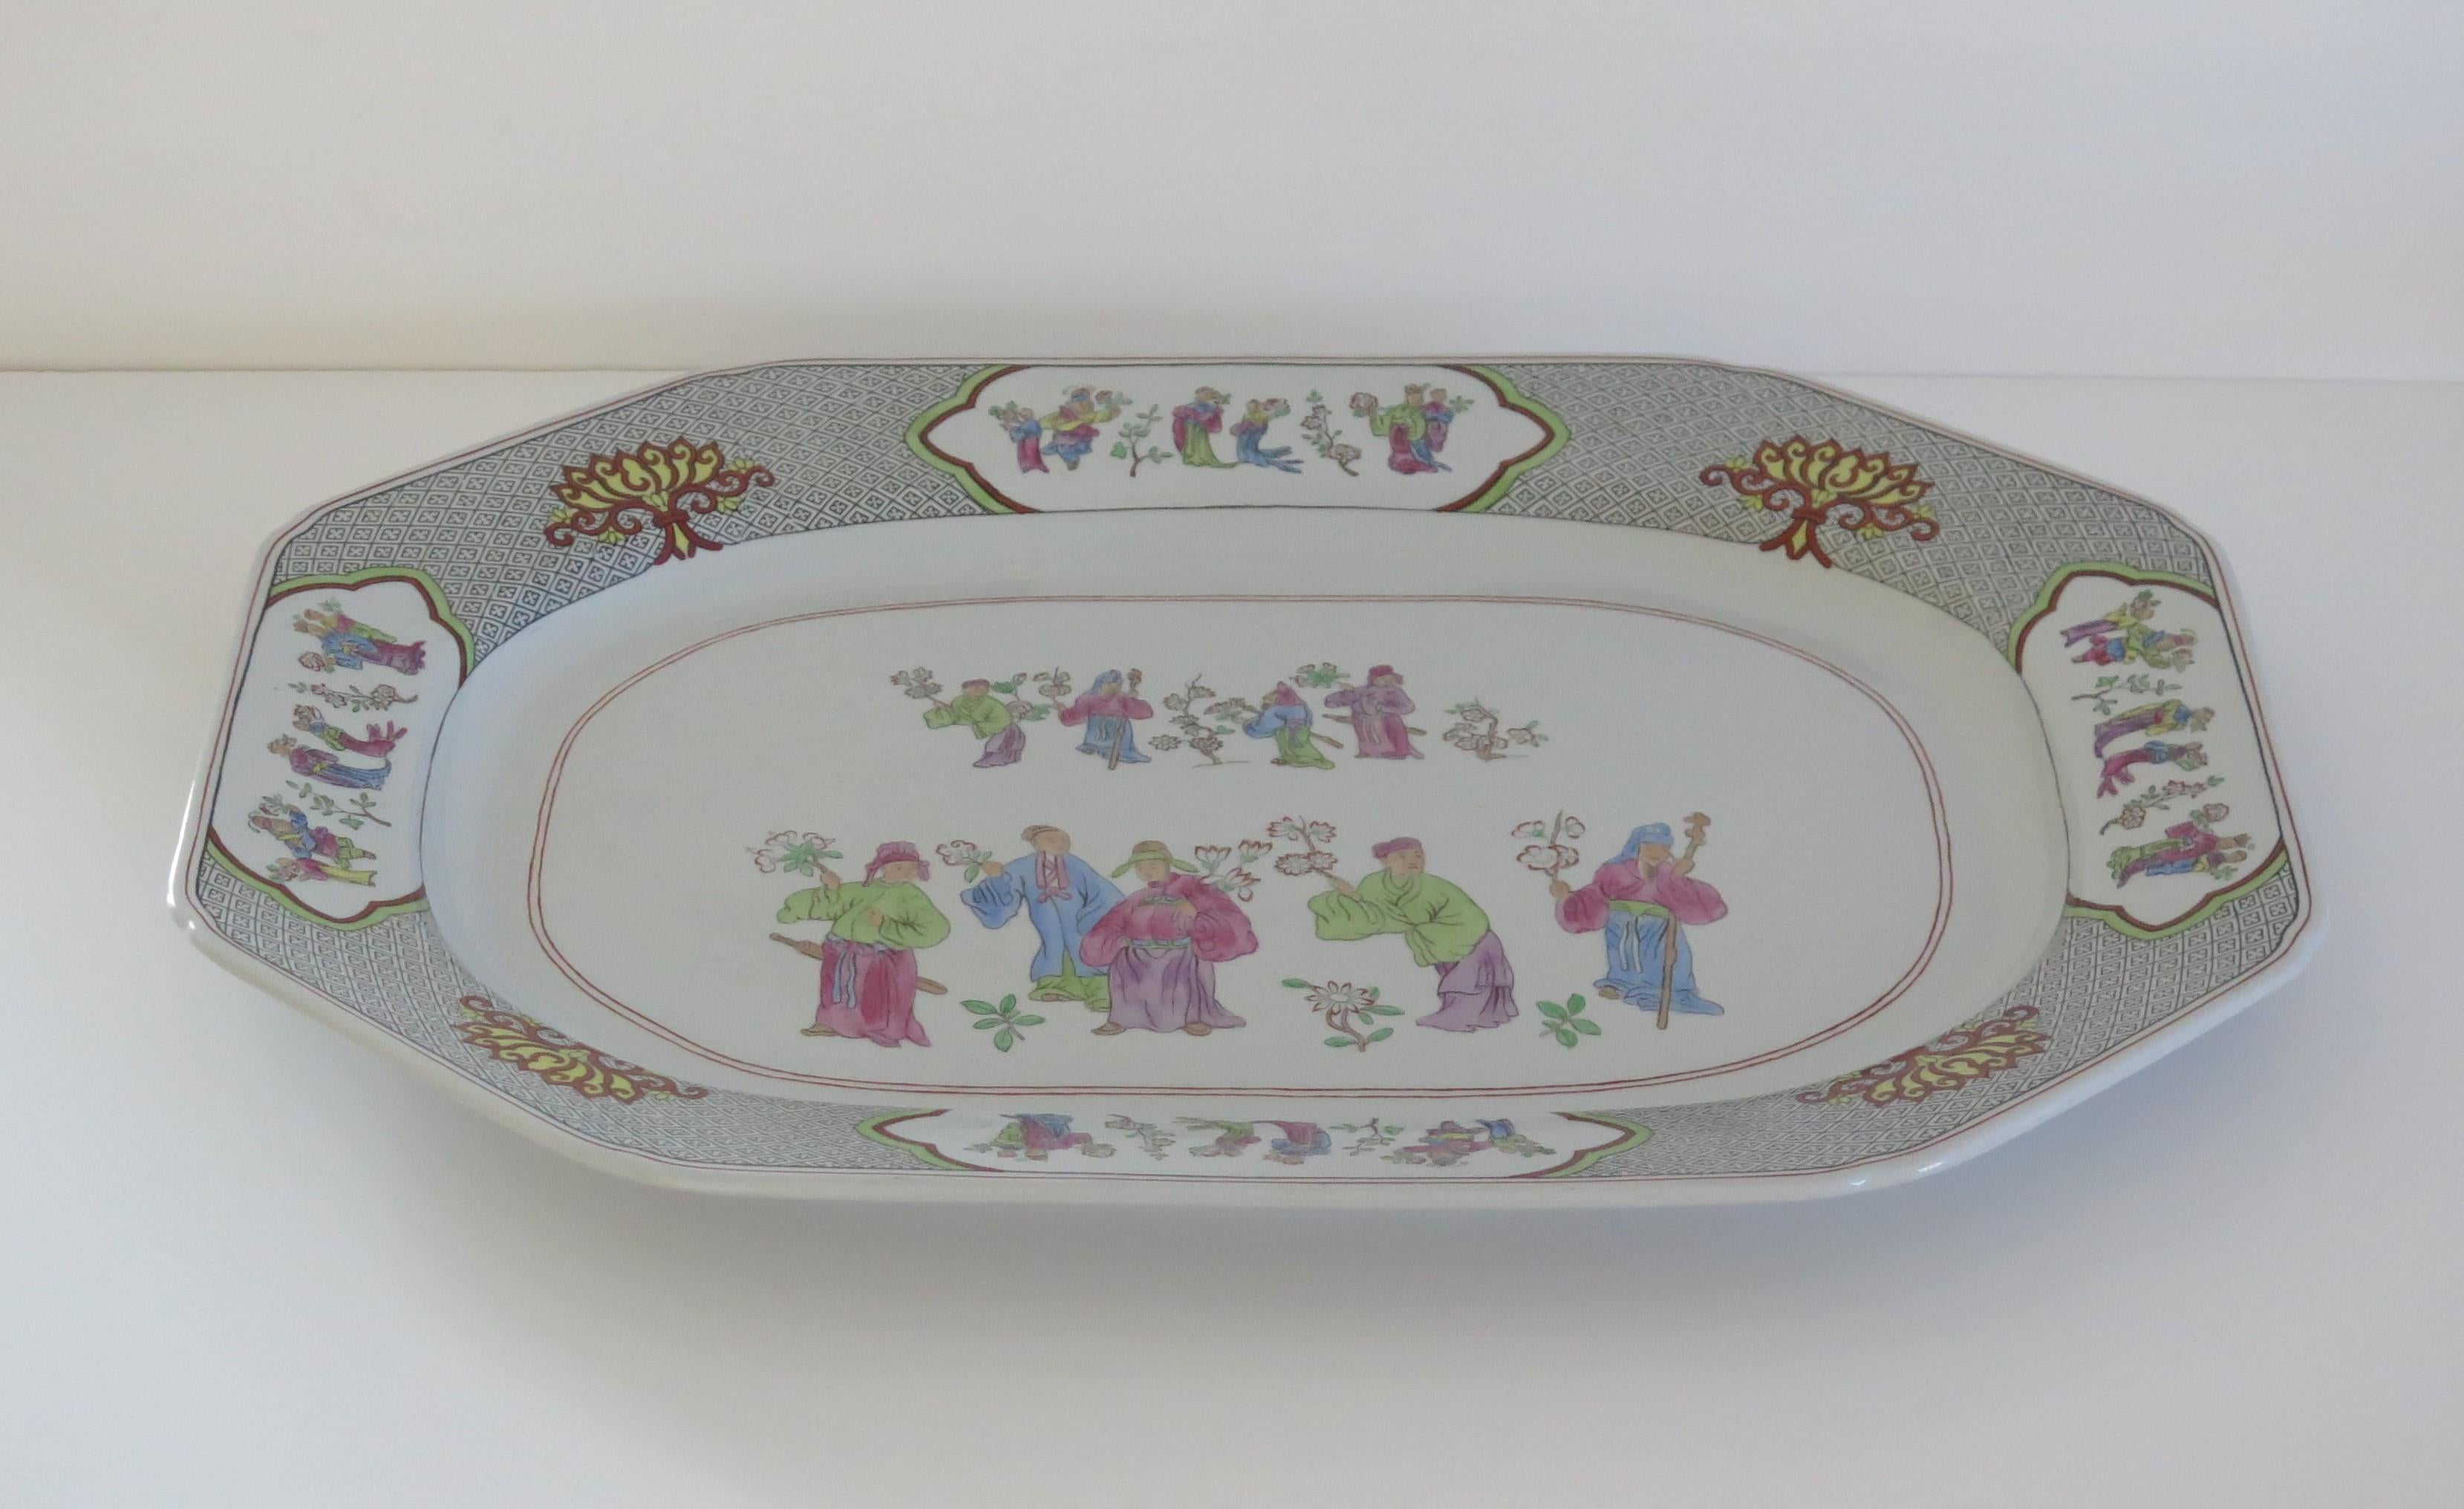 This is a beautiful very large Platter or Meat Plate by Copeland (formerly Spode) in a very decorative hand painted Chinese figure pattern, dating to the turn of the late 19th Century, Circa 1900.

The piece is well potted as a large rectangular